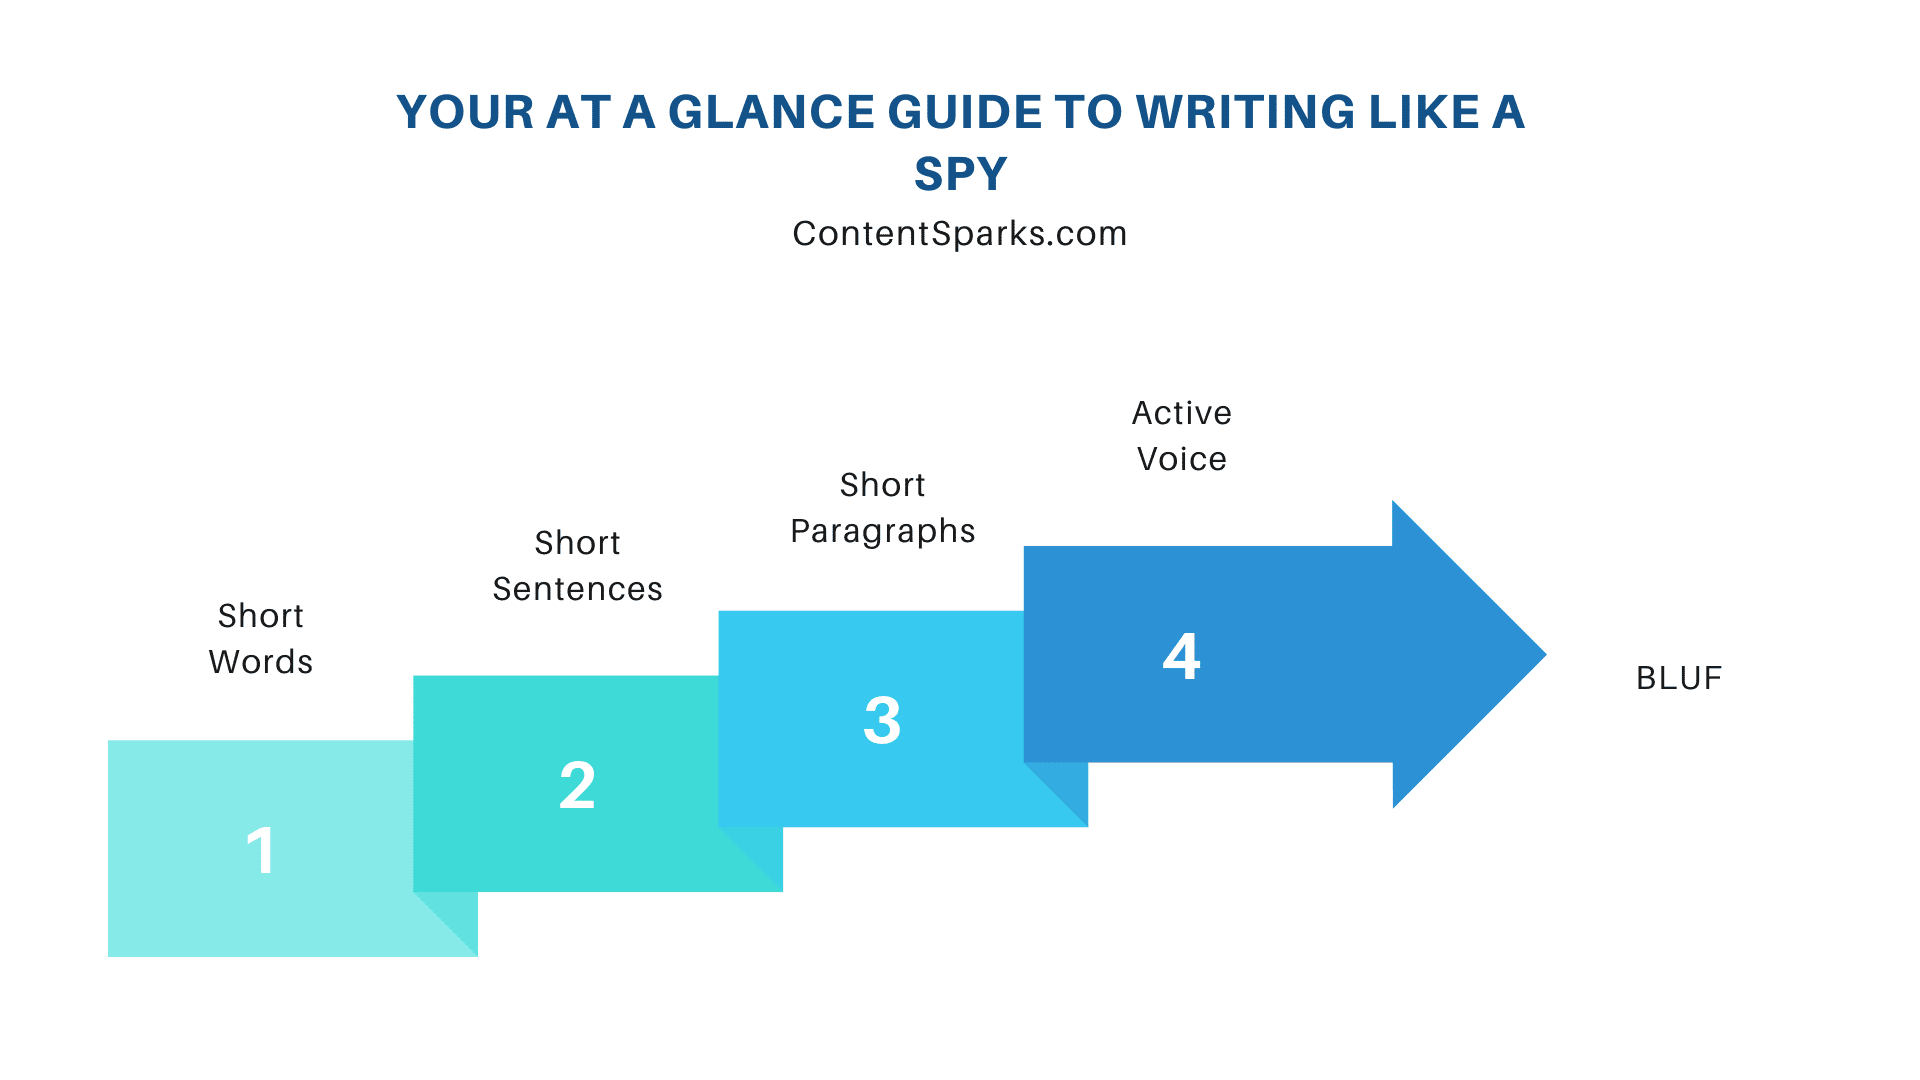 Your At a glance Guide to writing like a spy